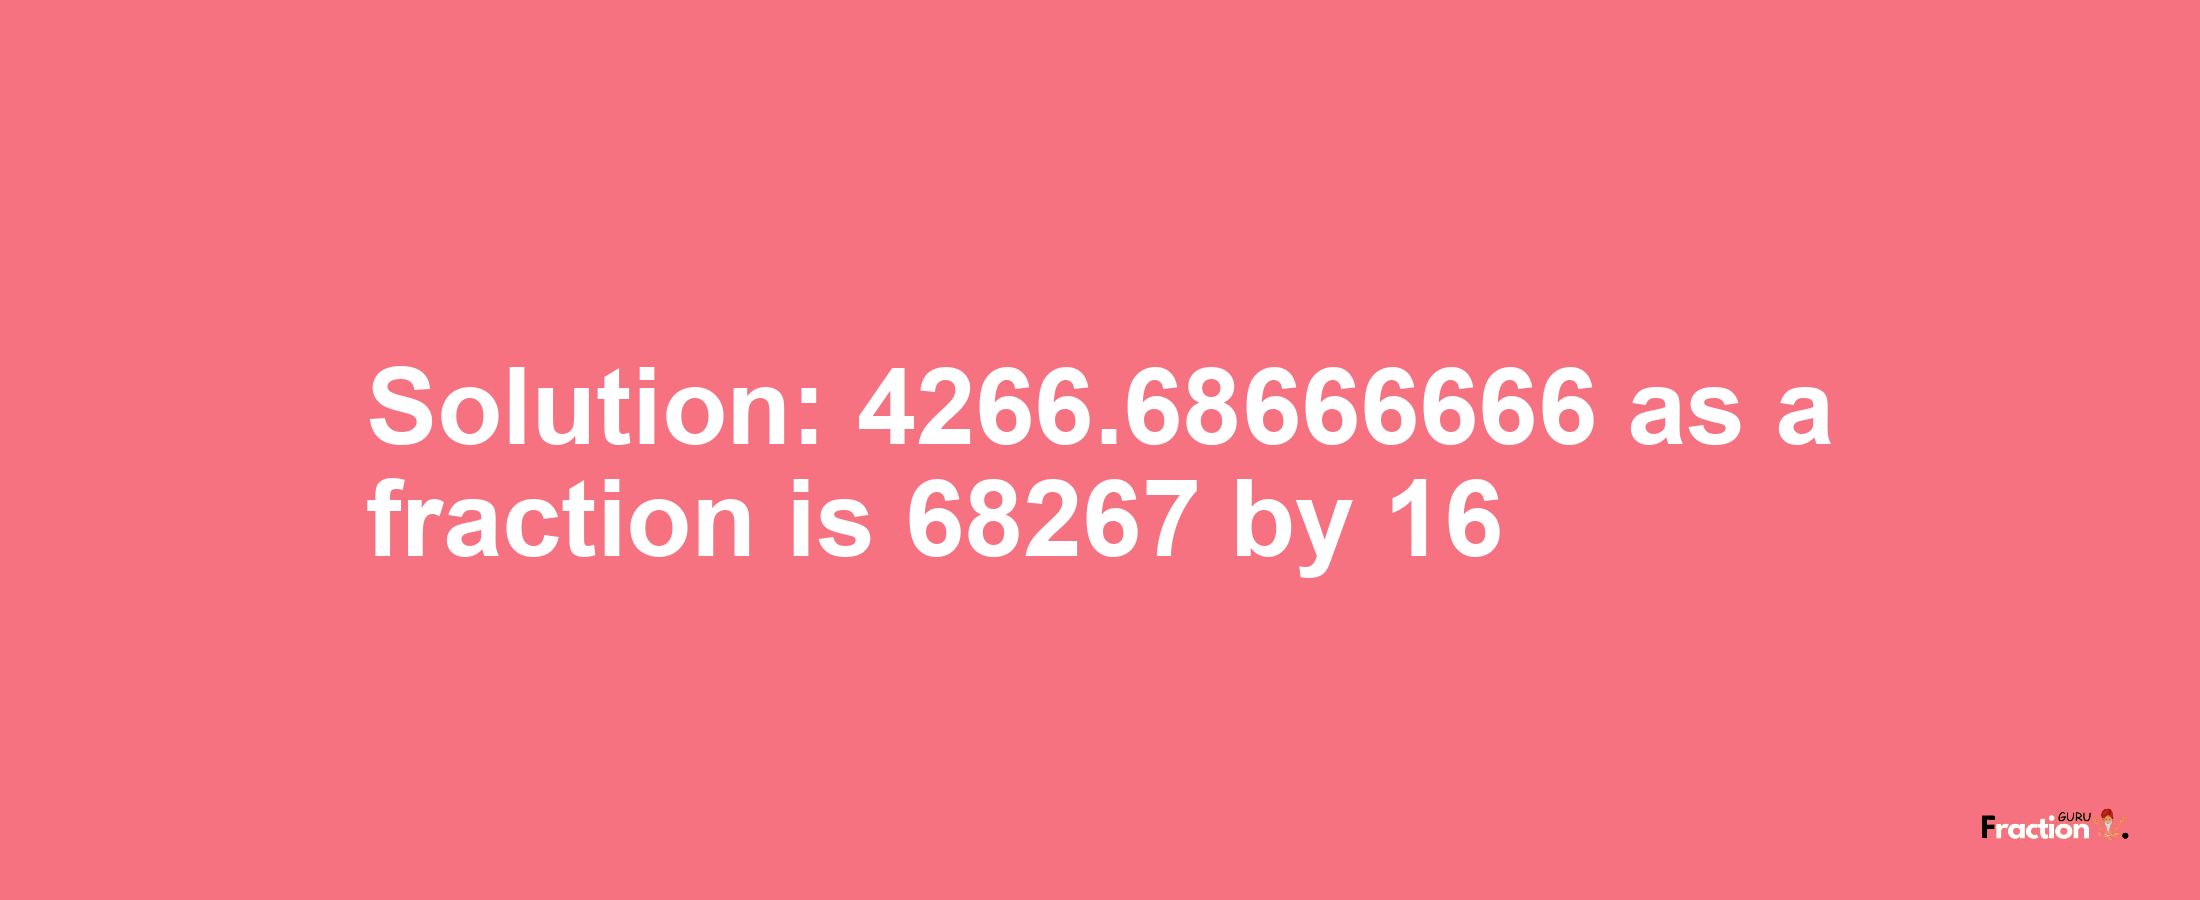 Solution:4266.68666666 as a fraction is 68267/16